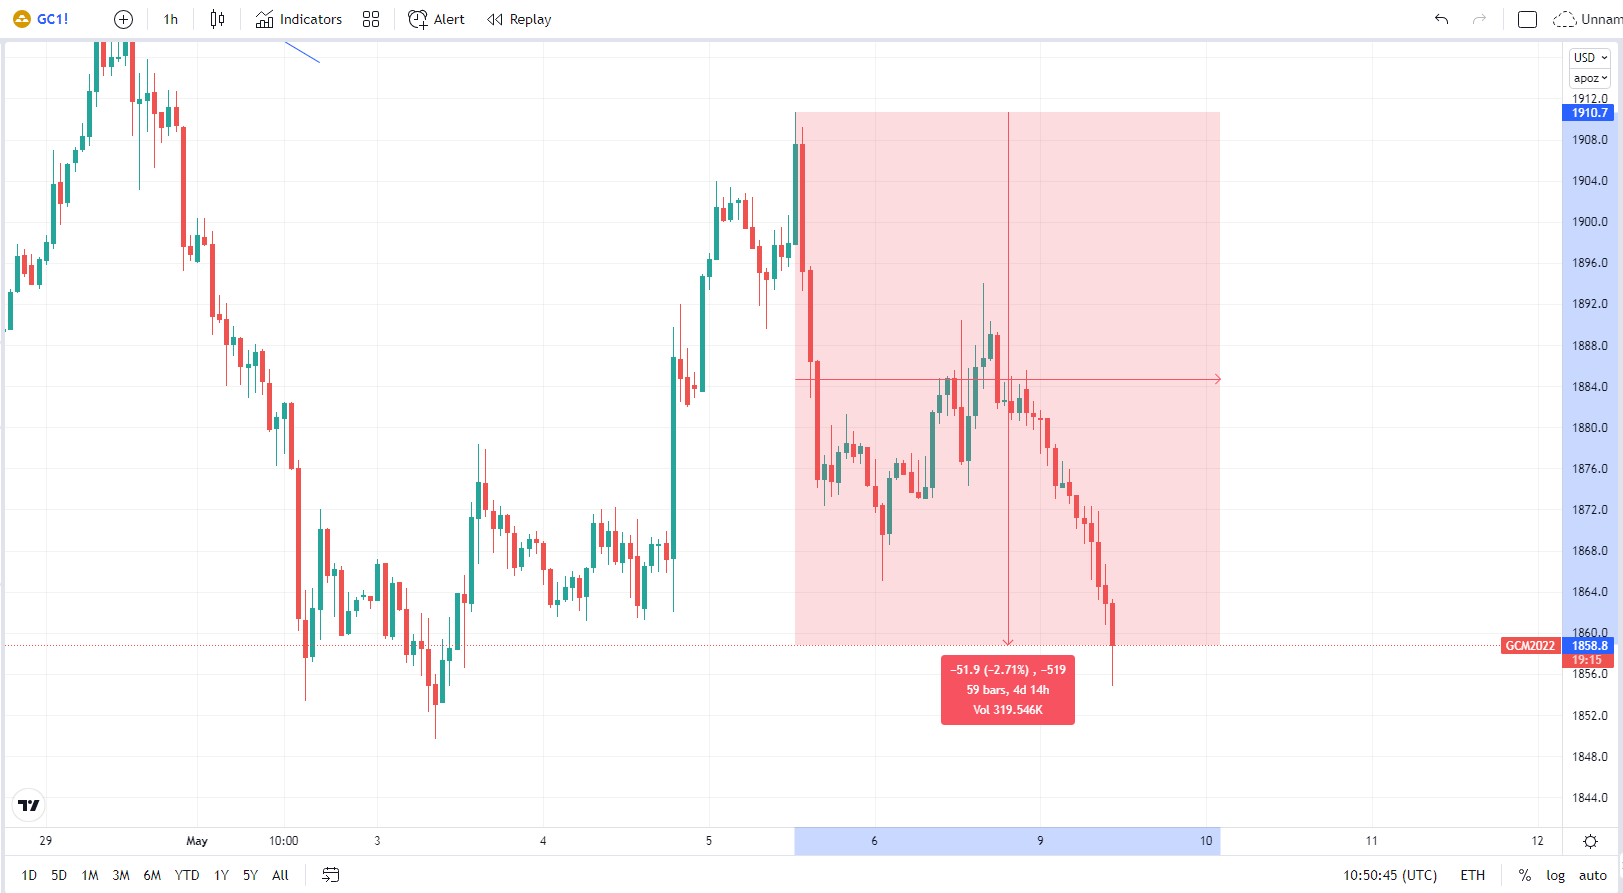 30 minutes chart of GC, 3-day decline. Source: tradingview.com 